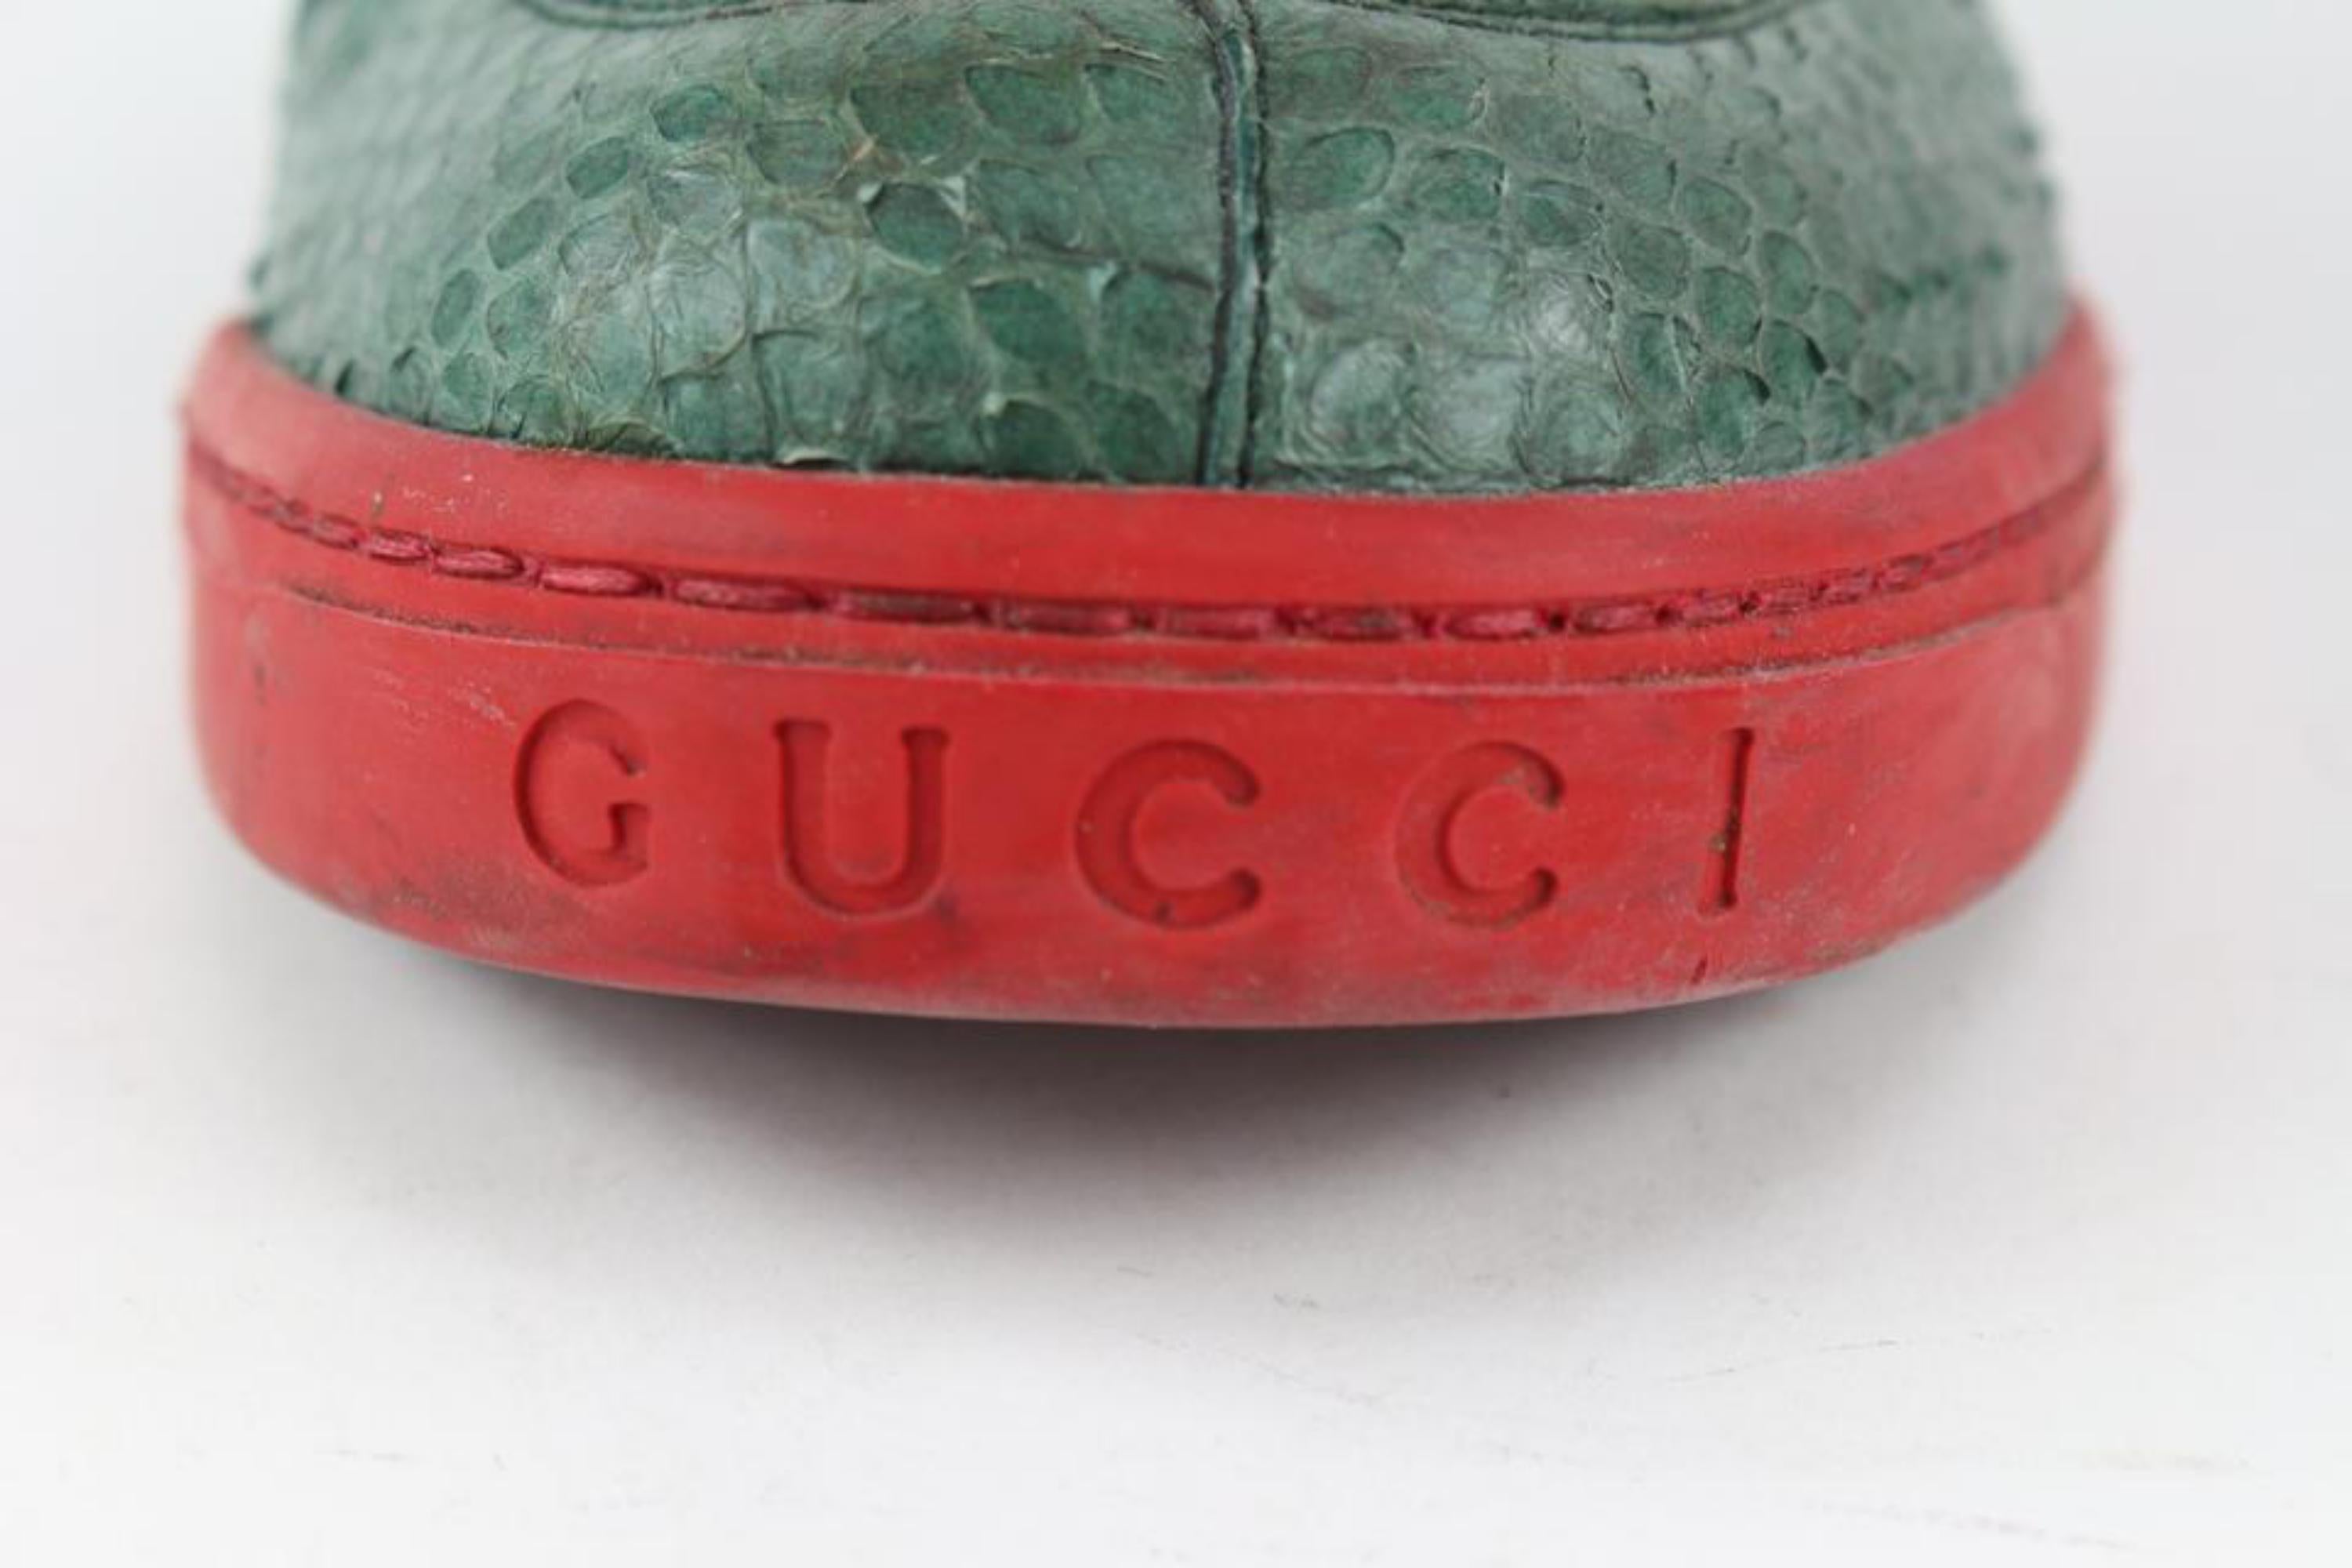 Gucci Men's 12.5 US Red x Green Python Low Top Classic Sneaker 1gg1112 3